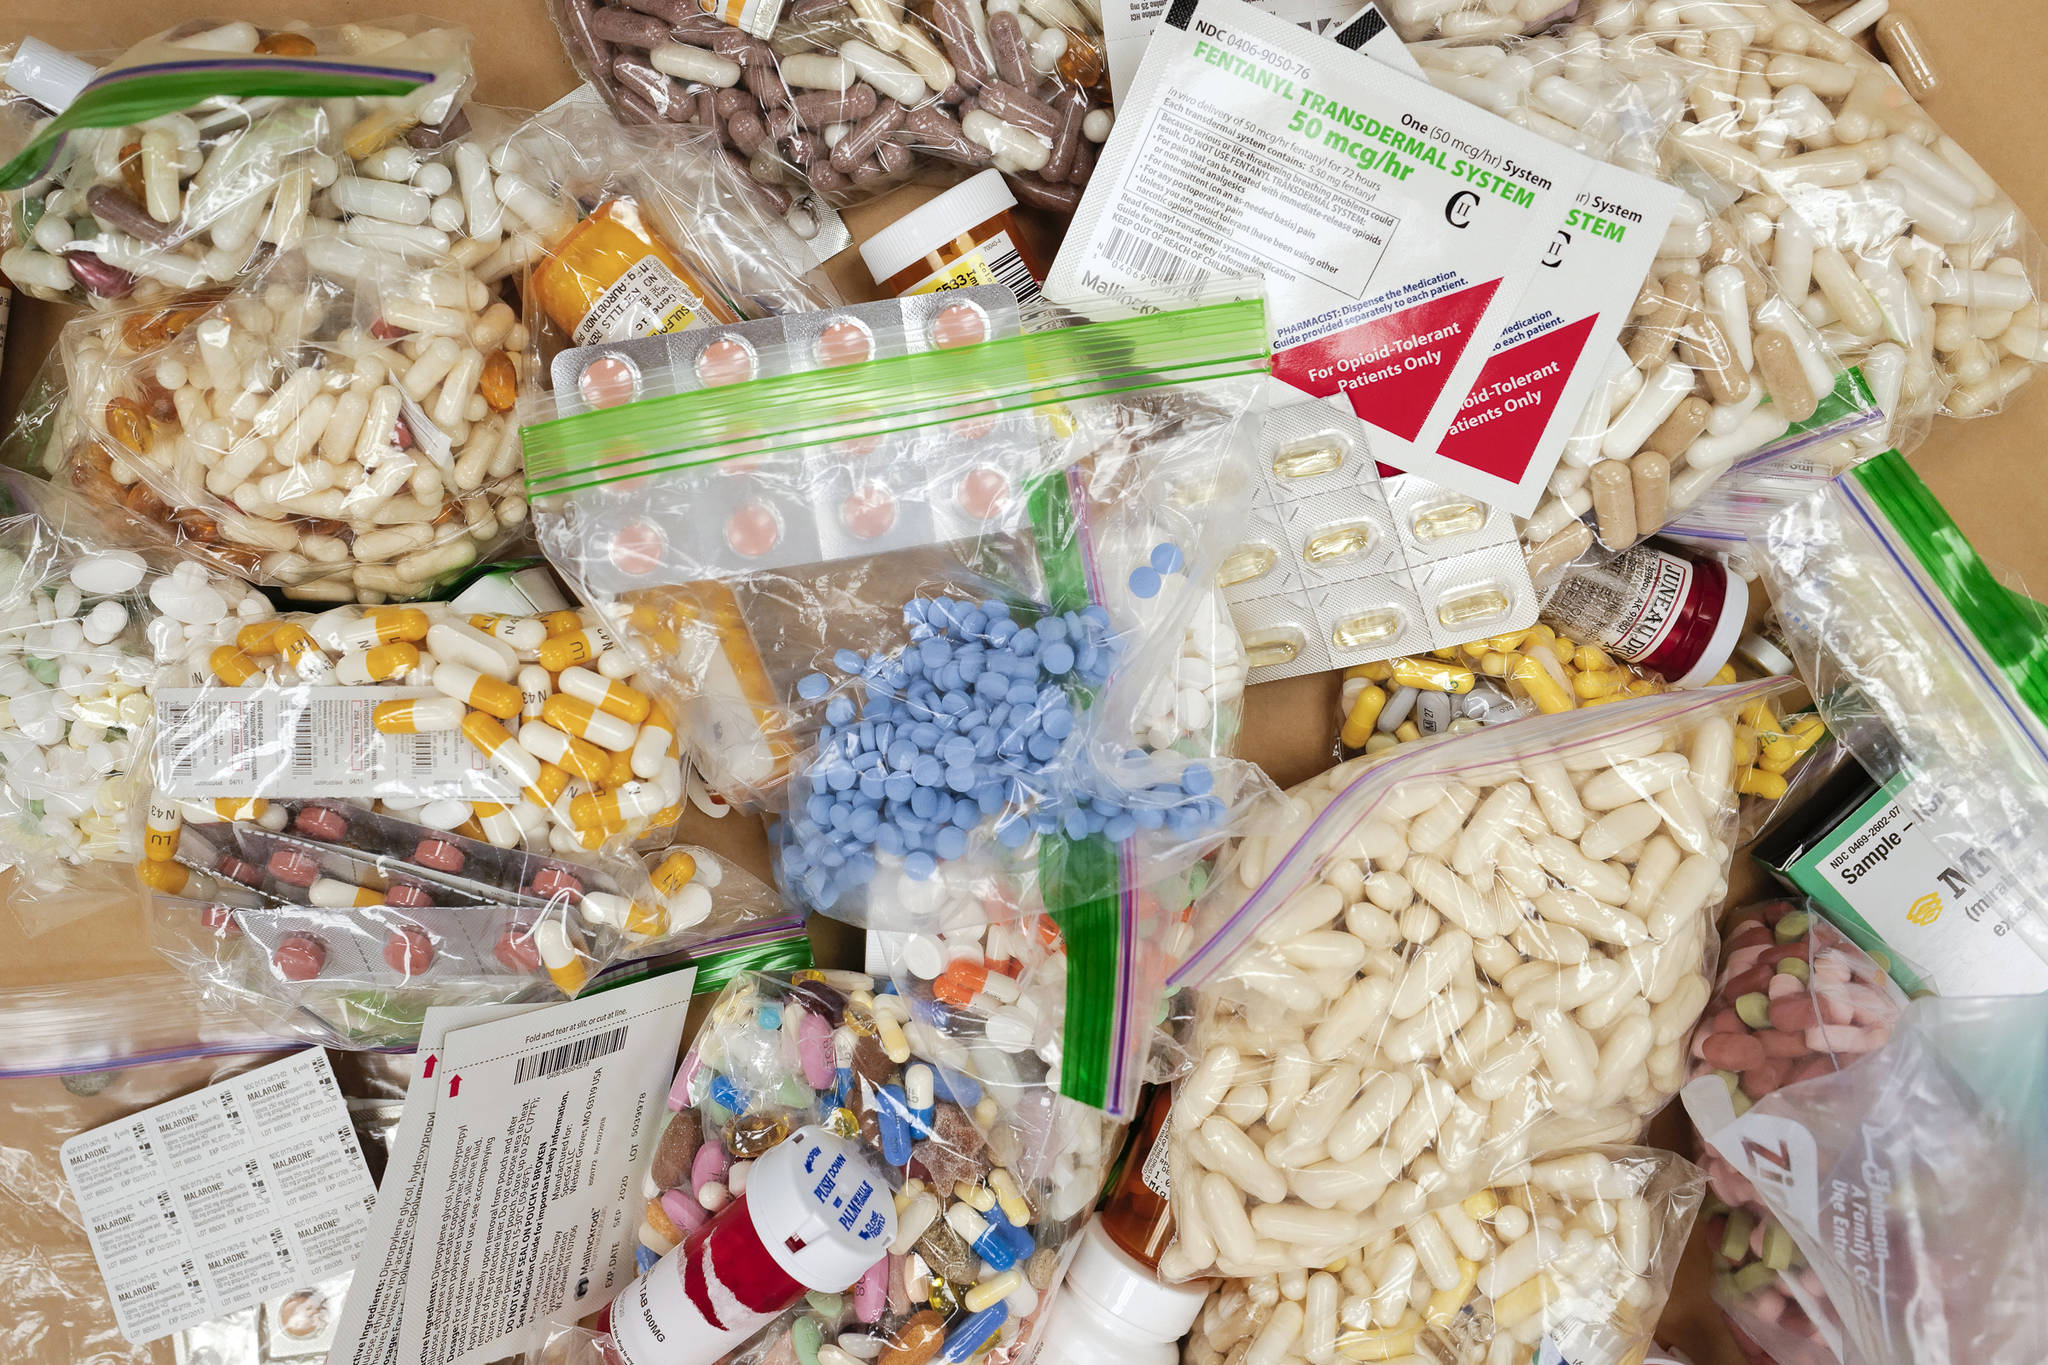 Prescriptions drugs, vitamins, hormones, and other drugs left in the drug drop box in the lobby of the Juneau Police Department in September 2019.The drop box gives residents a safe place to disposed of their unused prescription narcotics. The state announced on Thursday it will receive more than $1 million as part of a settlement with a consulting firm accused of “turbocharging” the opioid epidemic. (Michael Penn / Juneau Empire File)